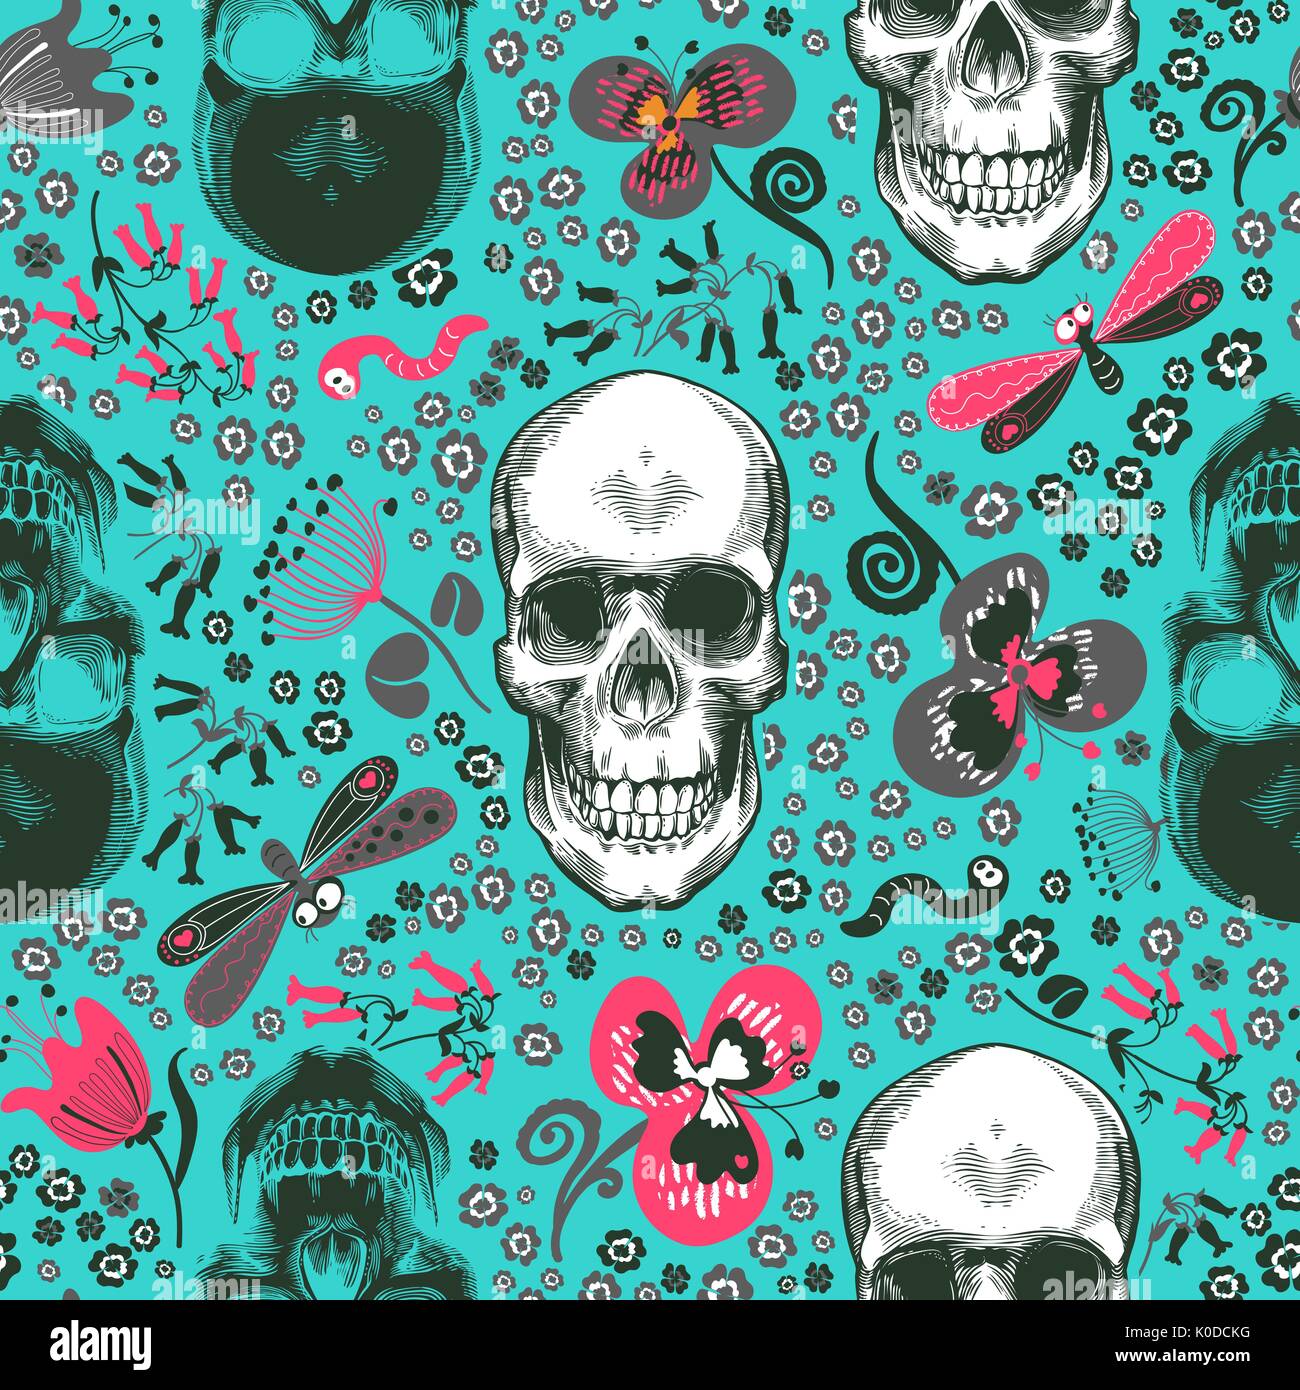 Lovely seamless pattern with human skulls drawn in etching style, pink, gray and black flowers and cartoon insects against blue background. Vector illustration for print, wallpaper, wrapping paper. Stock Vector